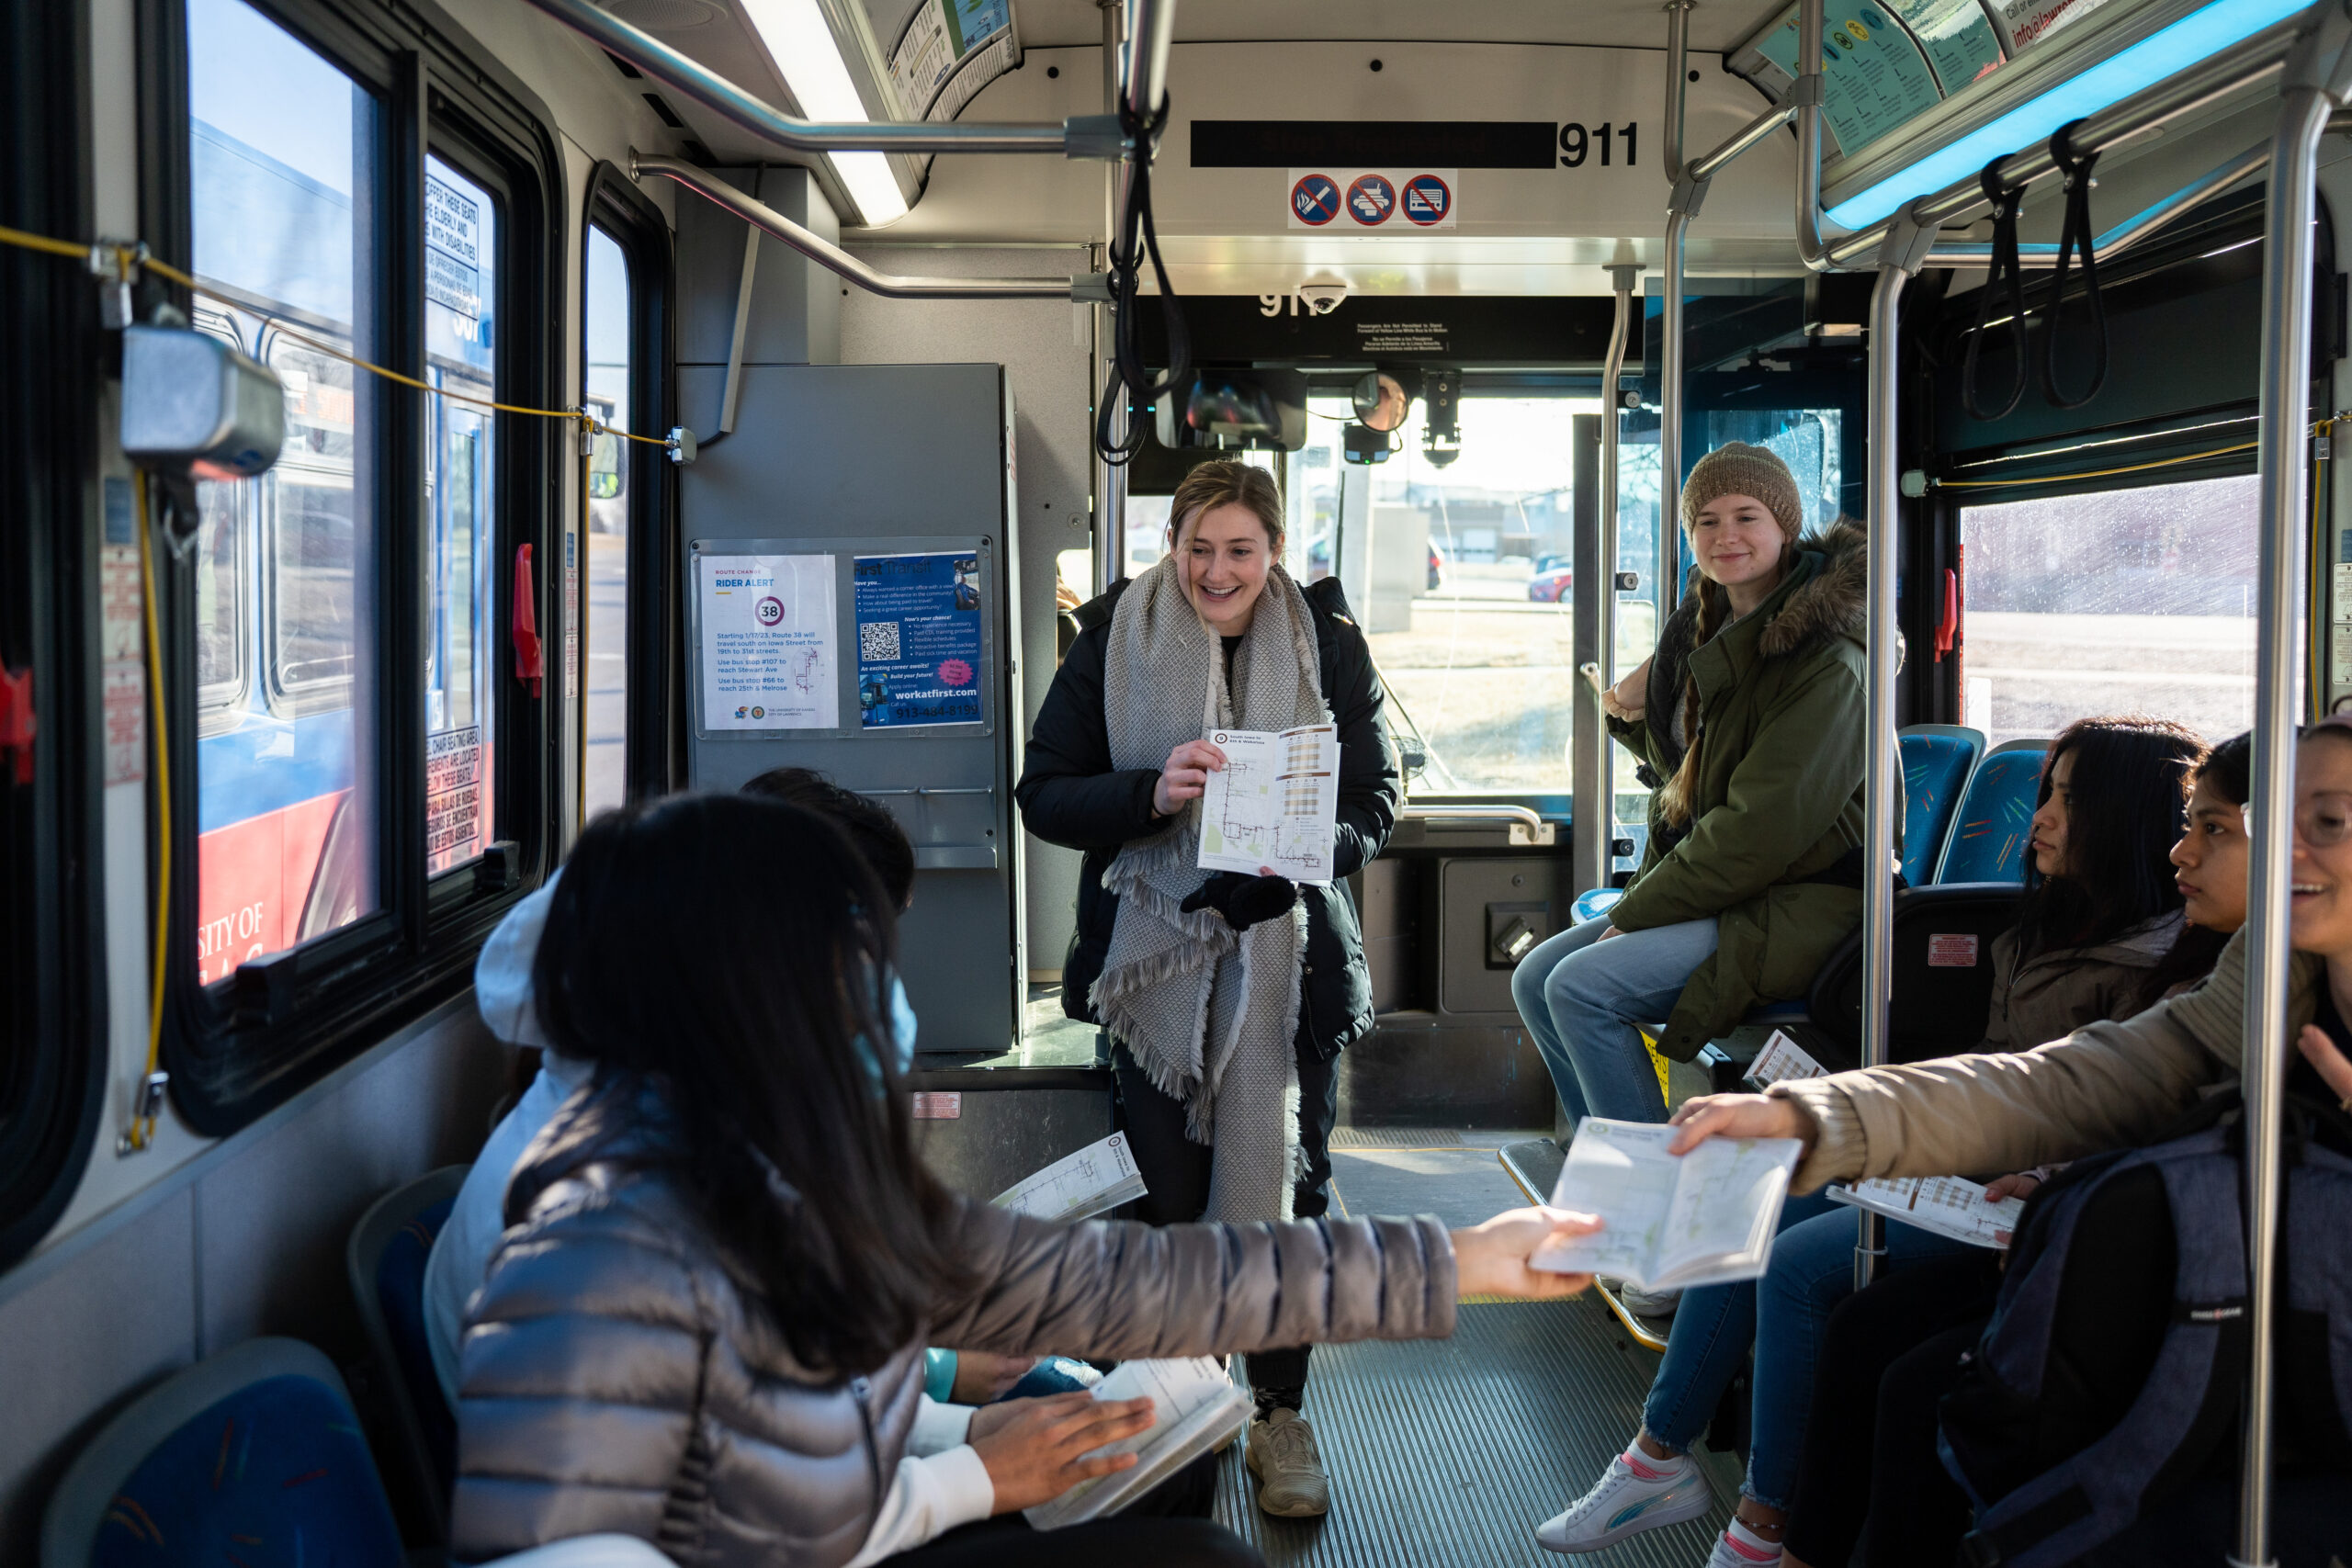 Featured image for “Transit staff seeks feedback on new routes and schedules”